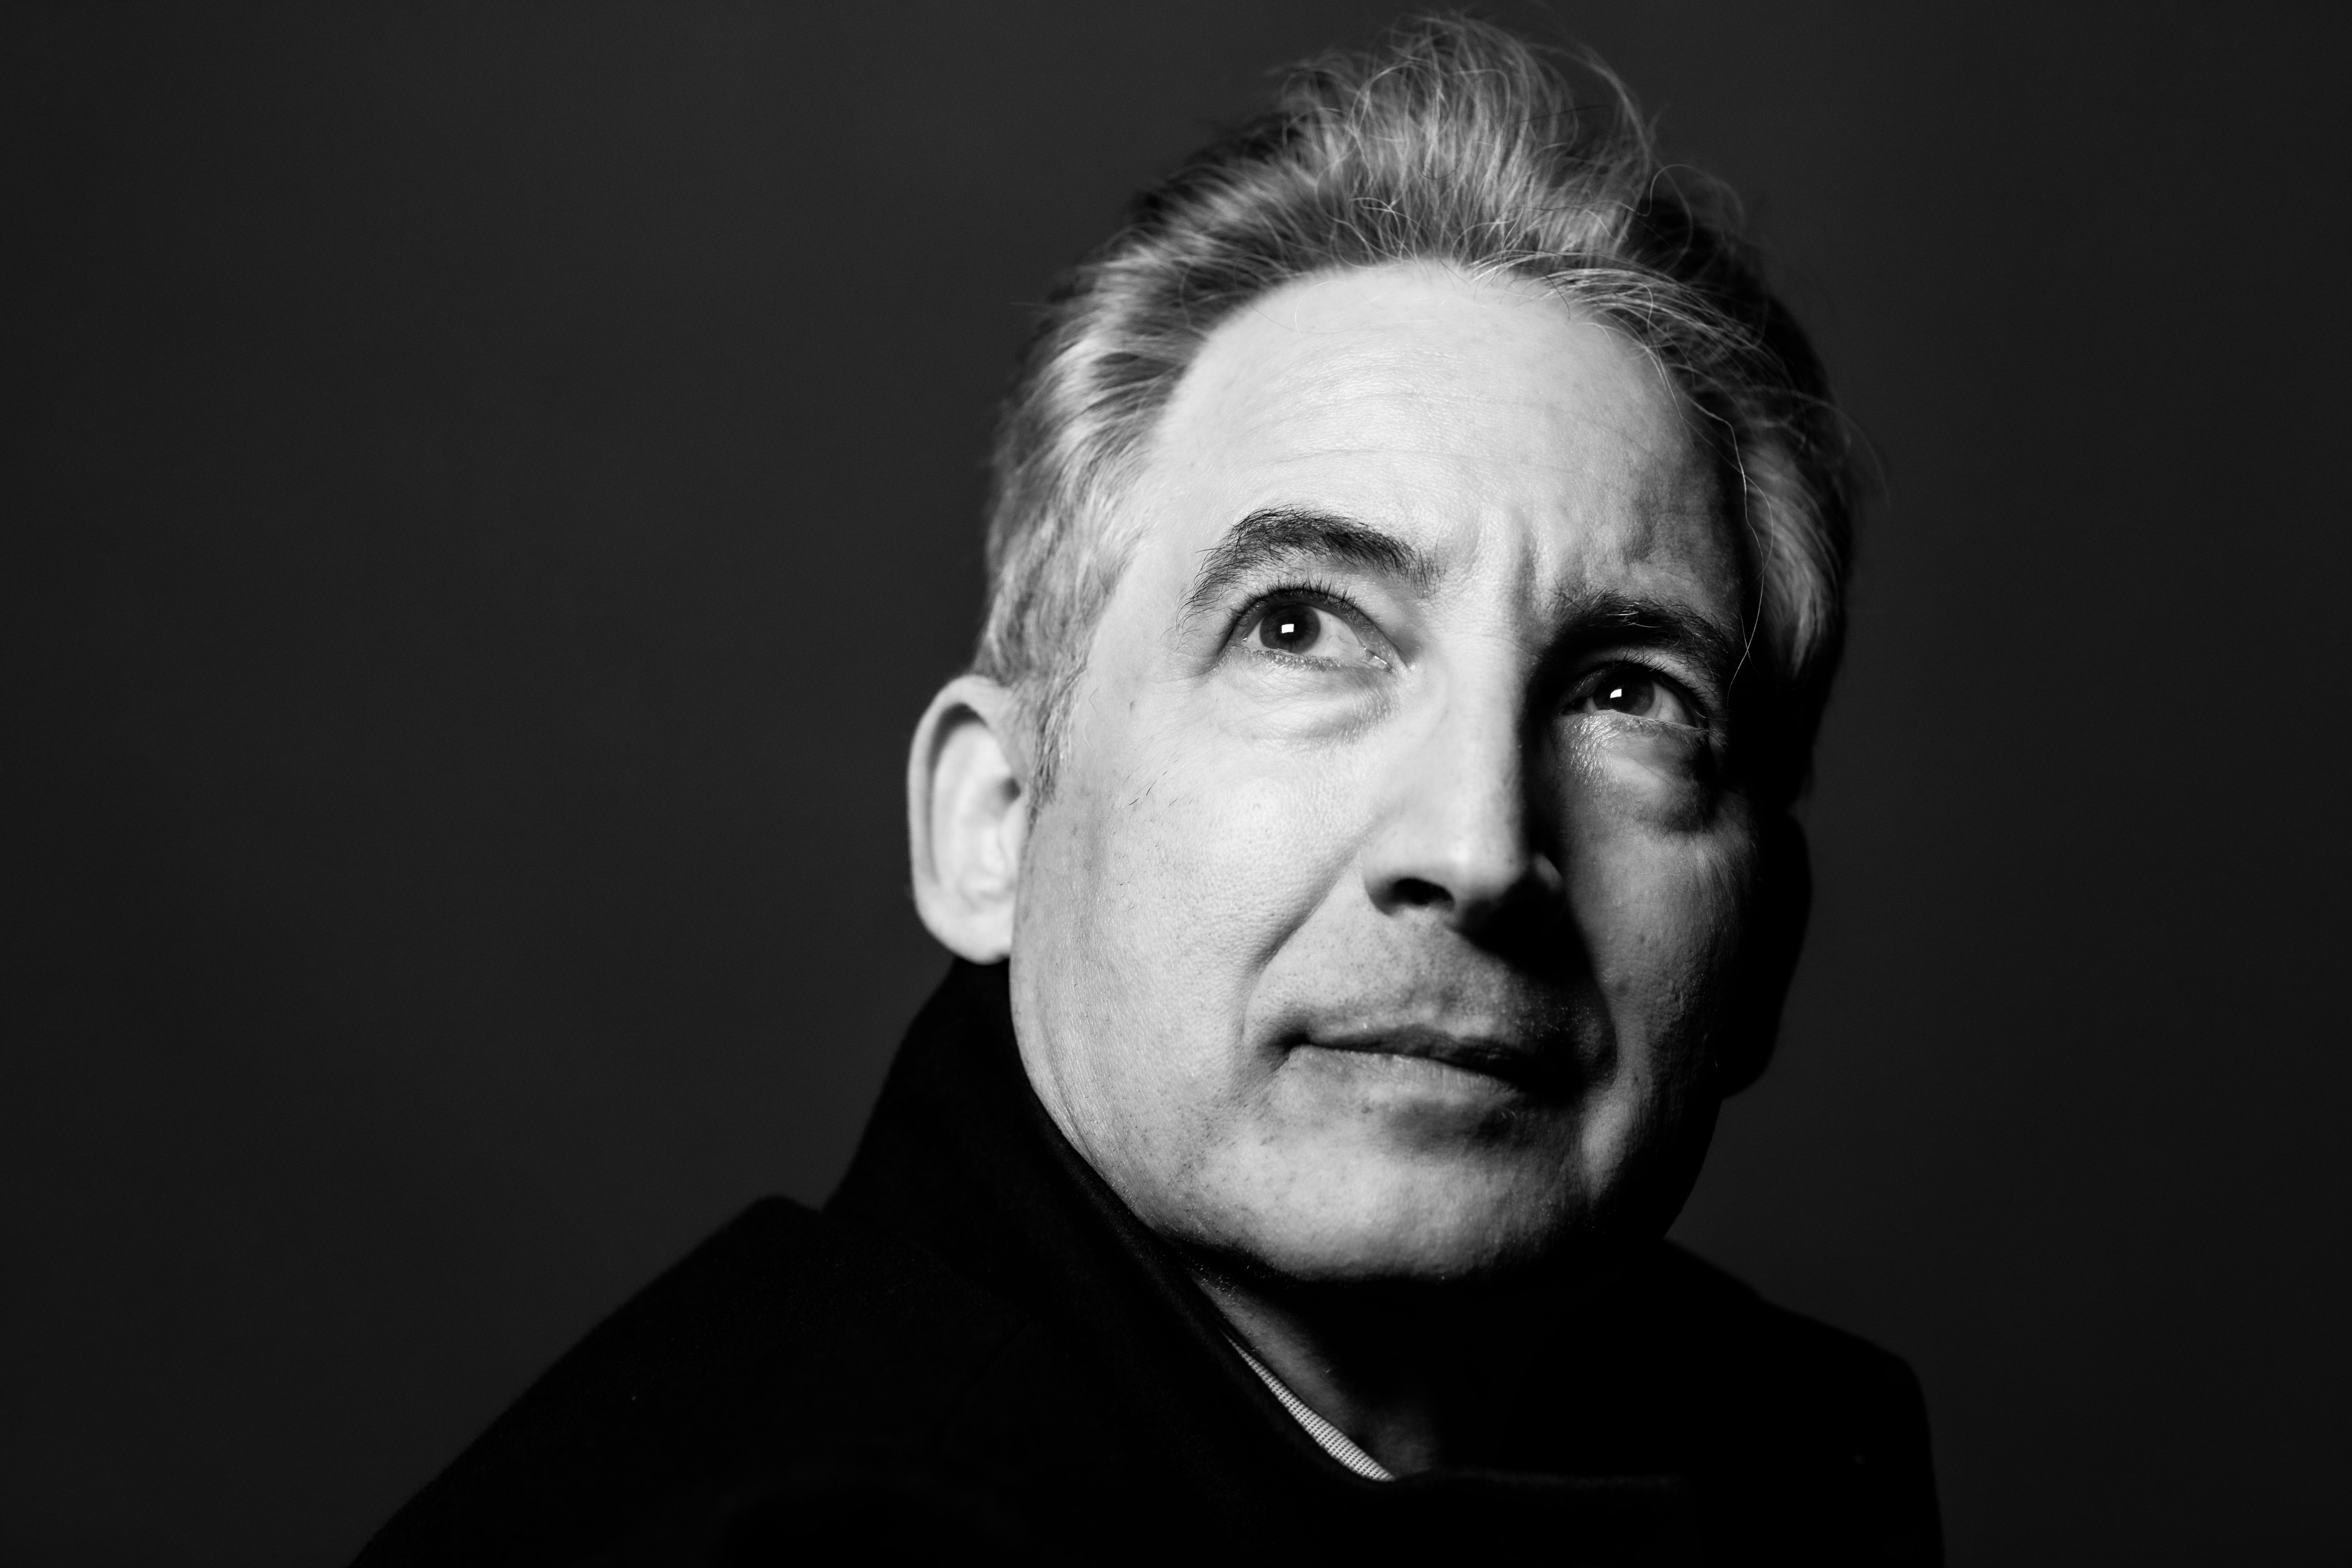 A black and white photograph of Brian Greene